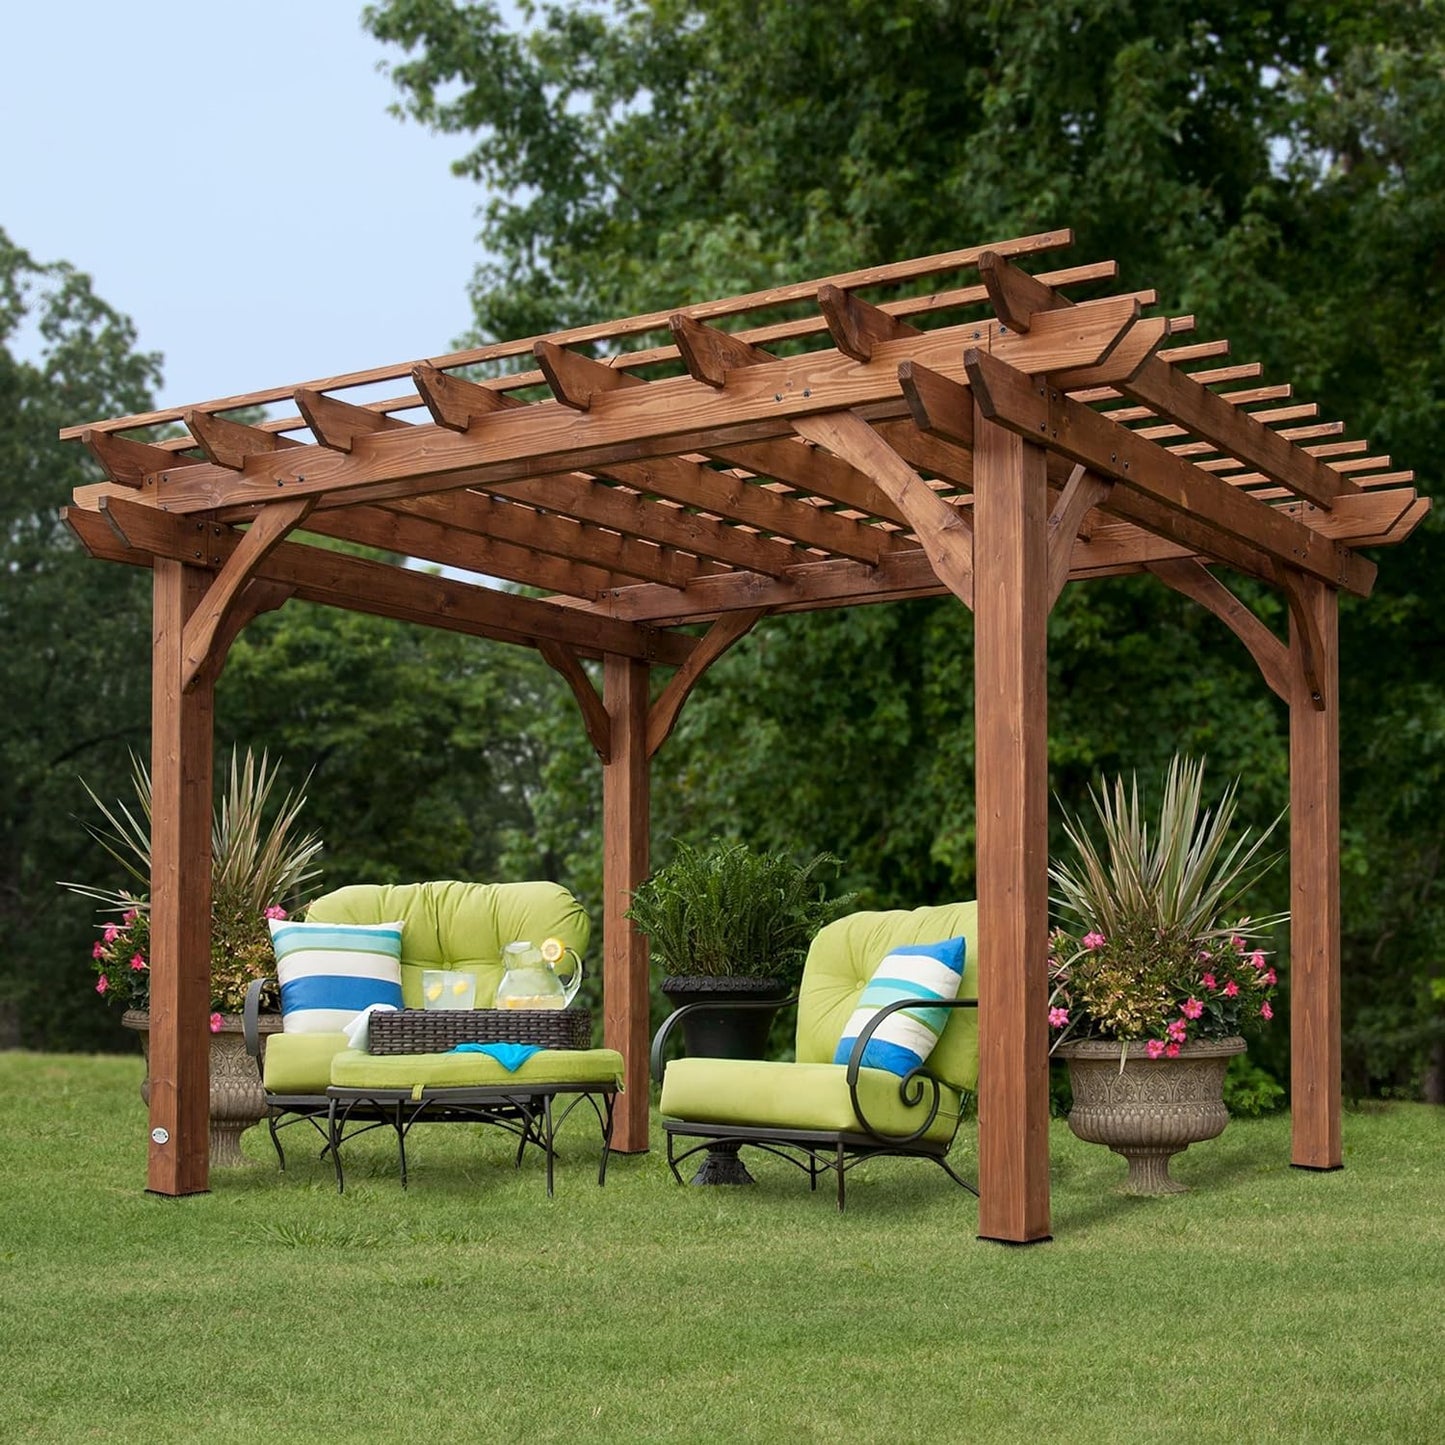 Backyard Discovery 12' by 10' Cedar Wood Pergola, Wind Secure, Strong, Quality Made, Rot Resistant, Concrete Anchors, Spacious for Outdoor Patio,